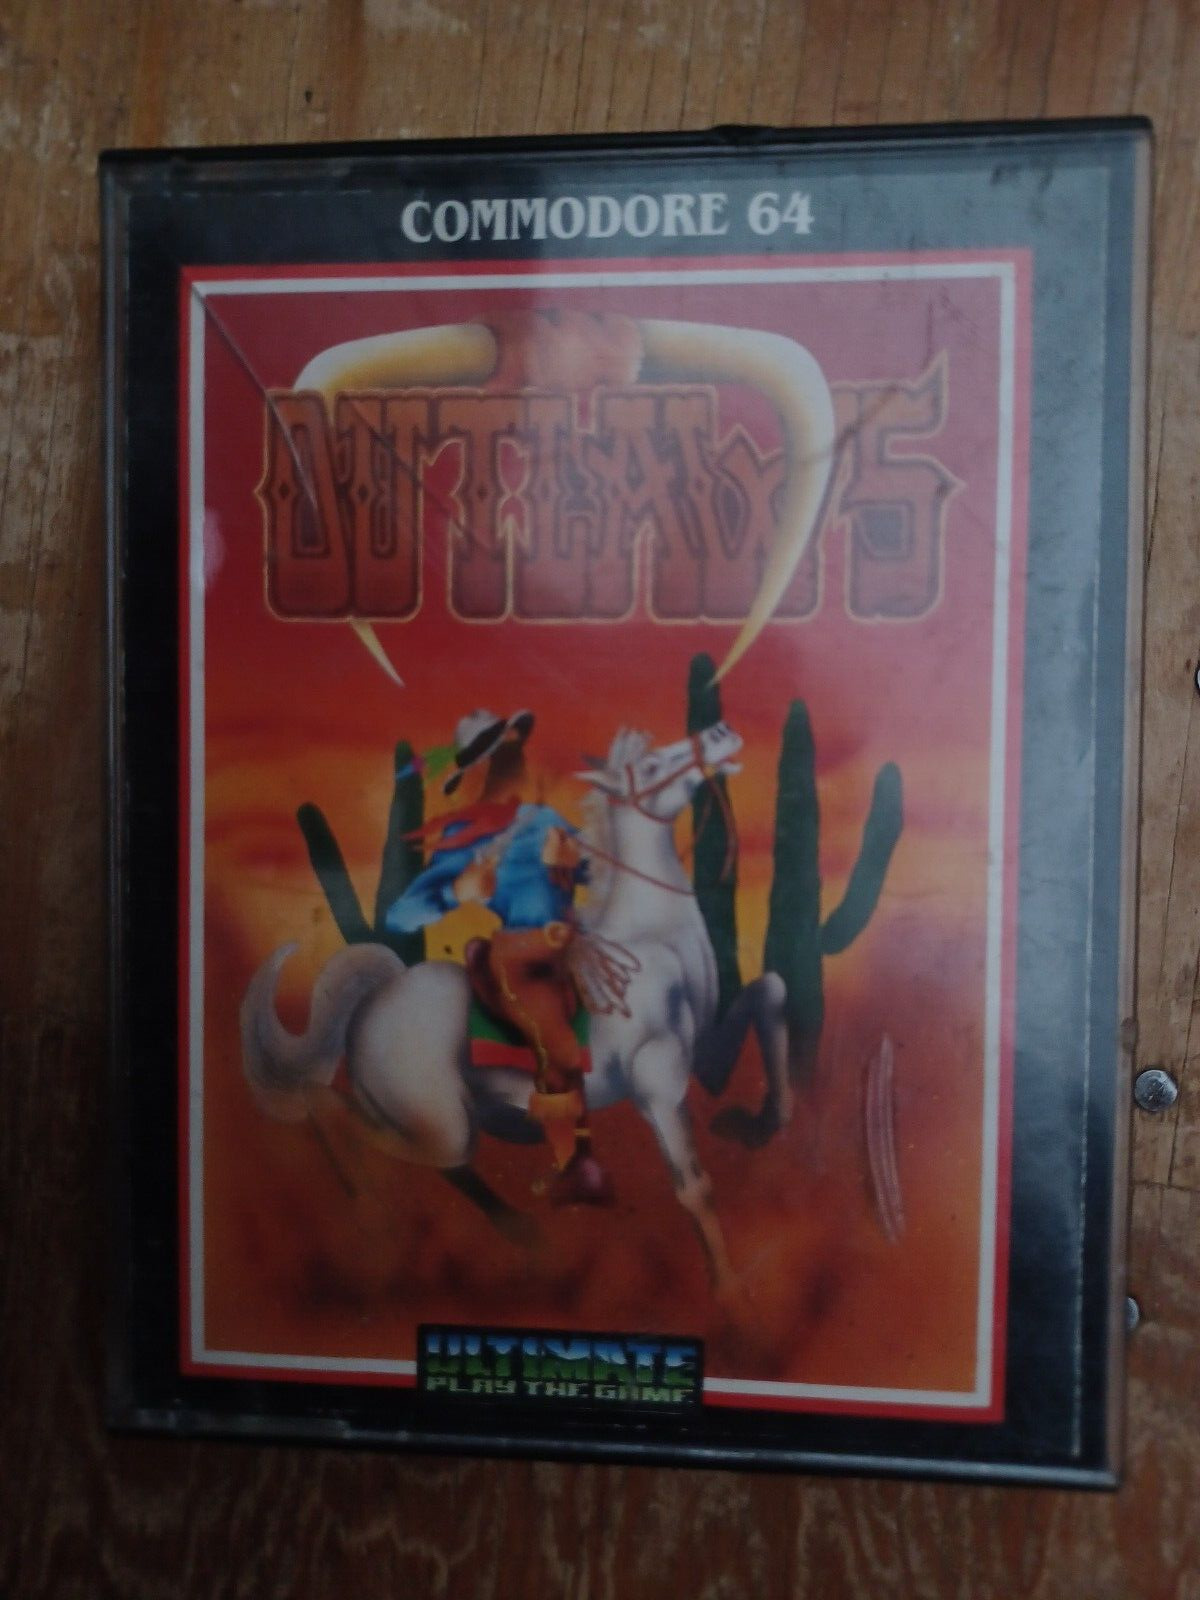 Vintage Commodore 64 128 OUTLAWS software - Tested and works